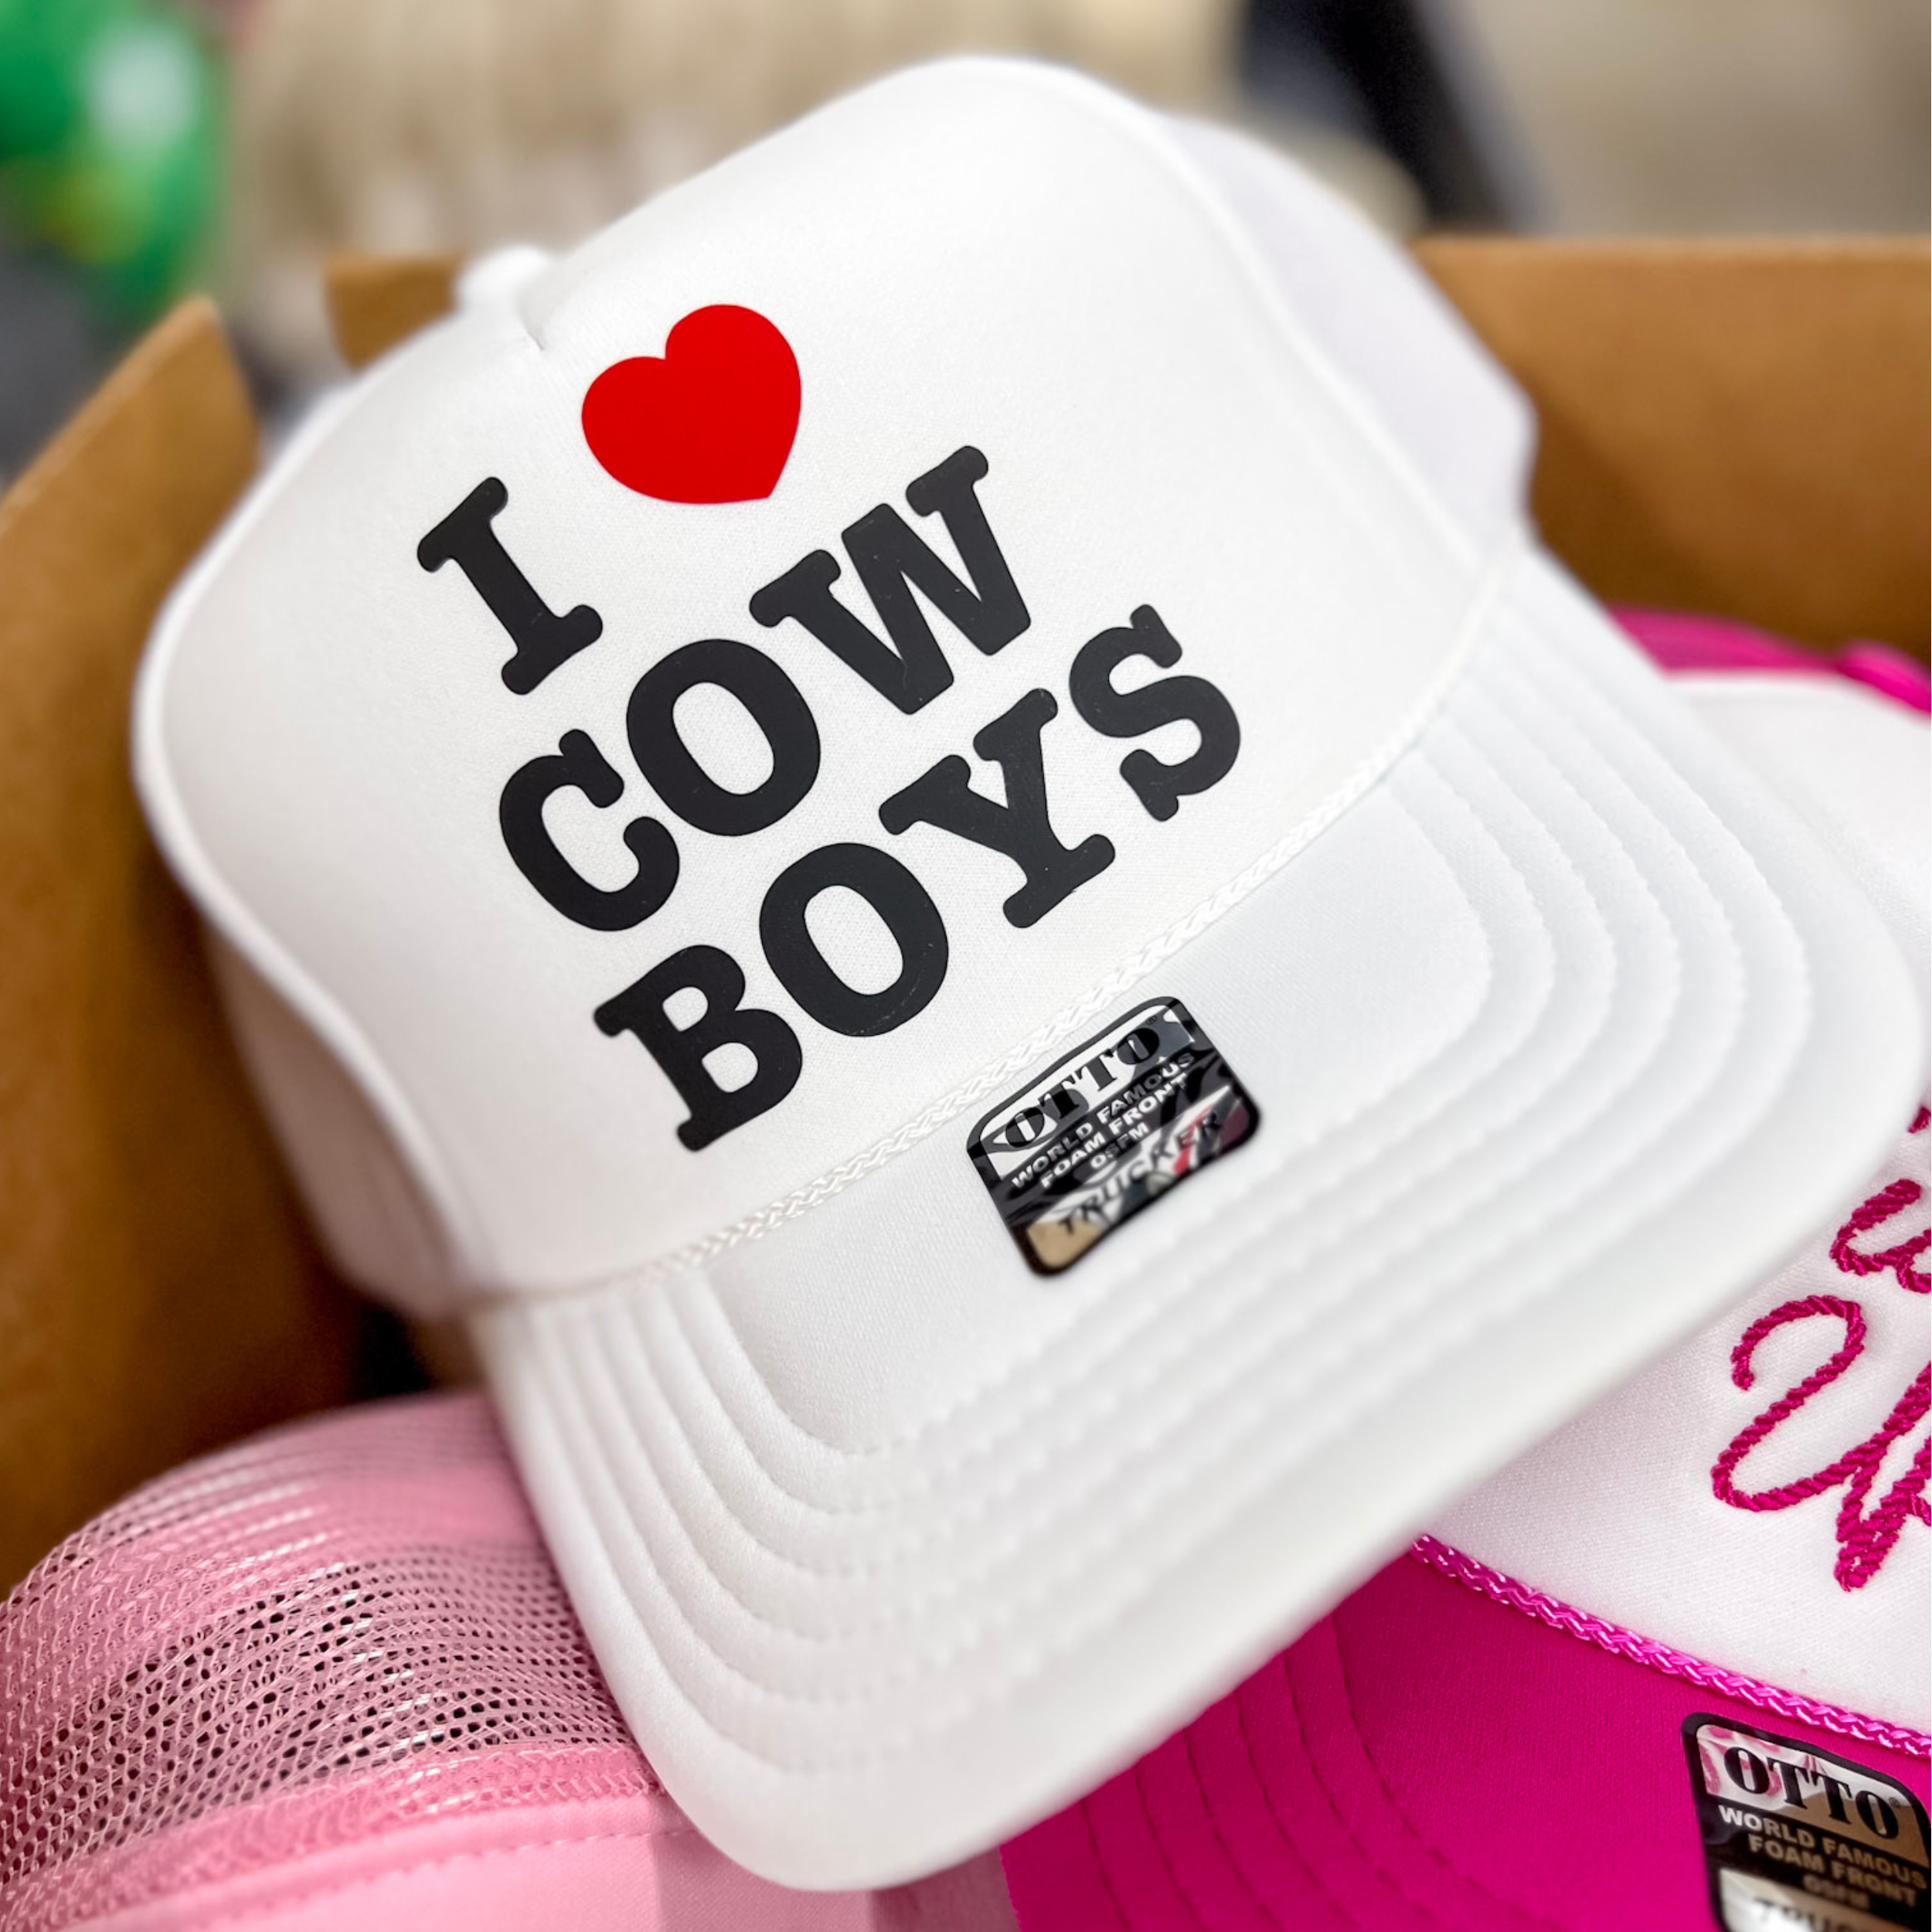 Photo features a white trucker hat with the words "I heart cowboys" in black on the front.